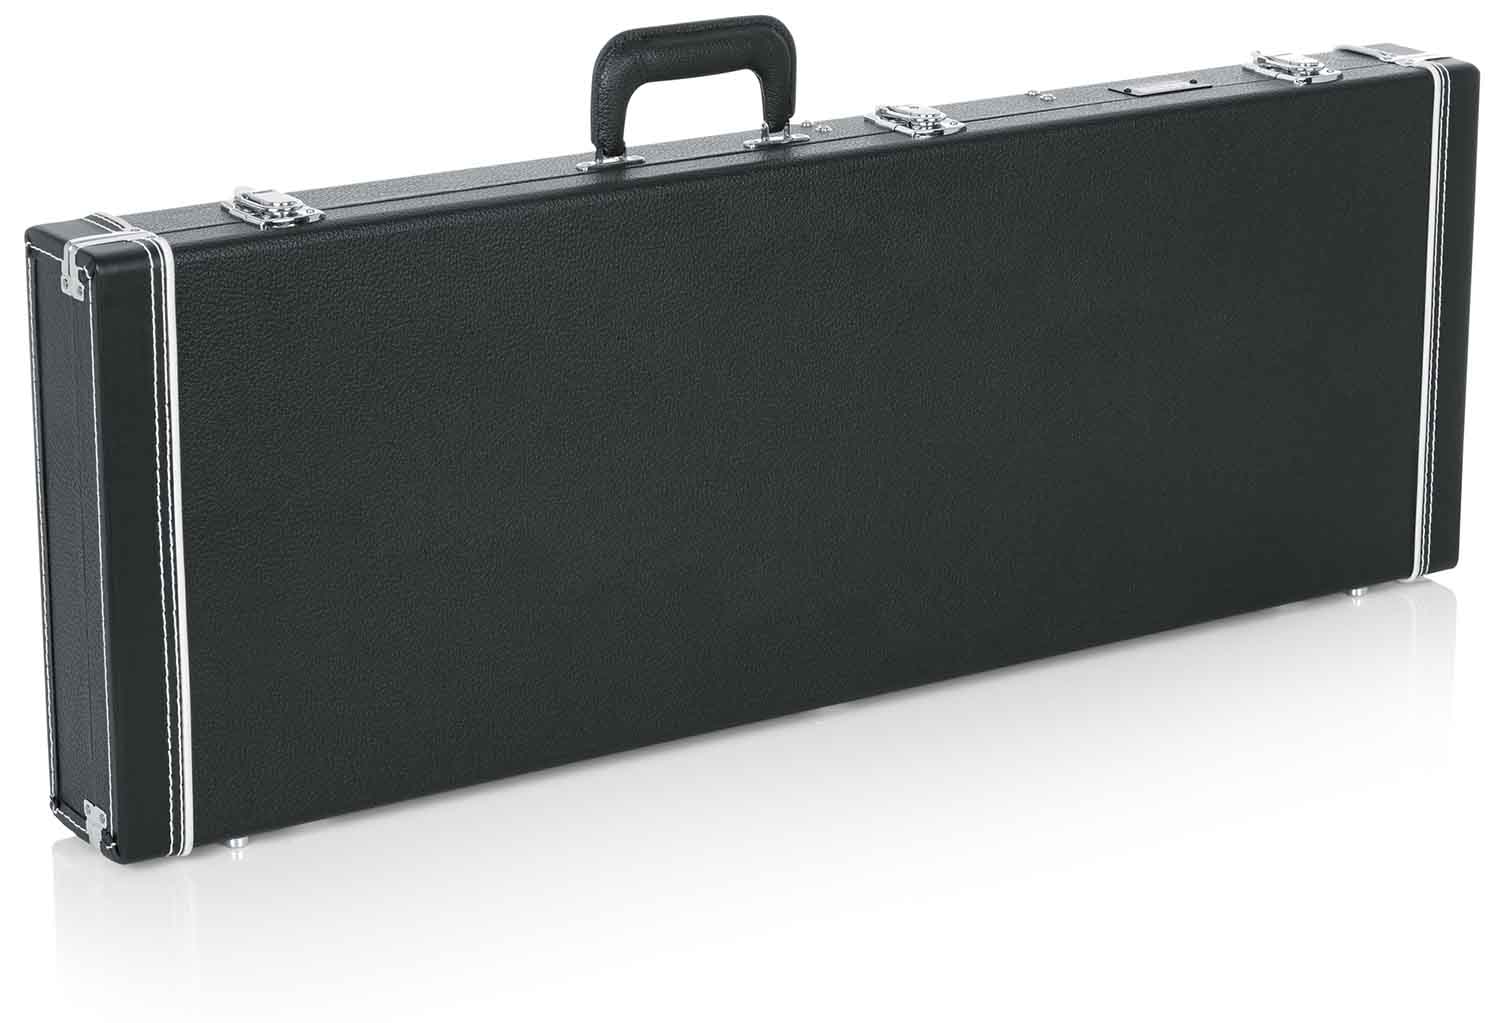 Gator Cases GW-ELECTRIC Deluxe Wood Case for Electric Guitars - Black - Hollywood DJ